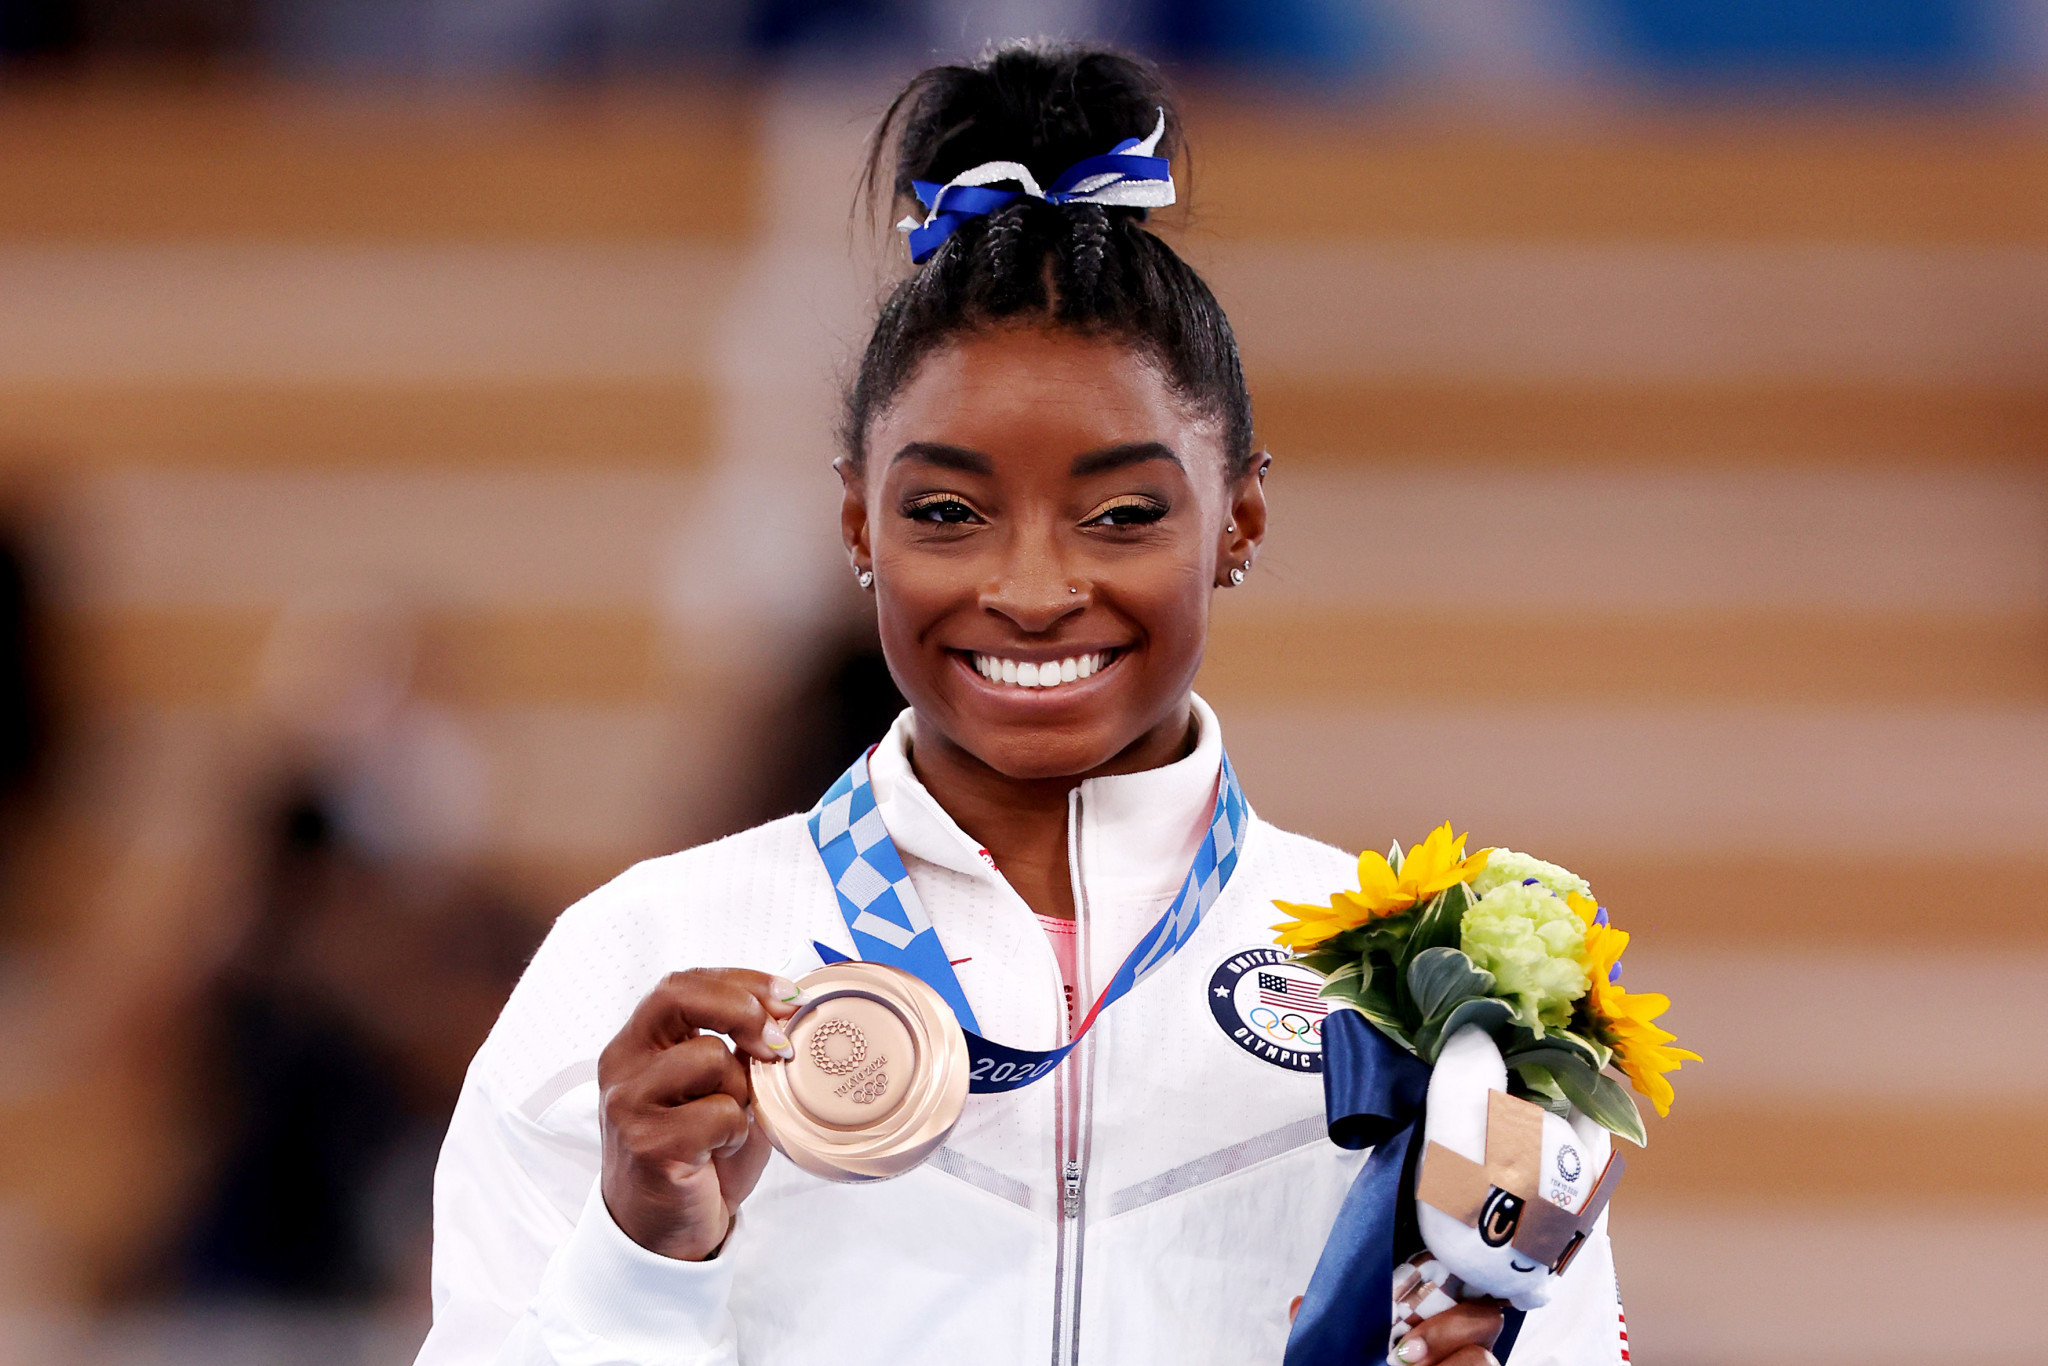 Simone Biles is the most gymnasts taking legal action against the FBI ©Getty Images